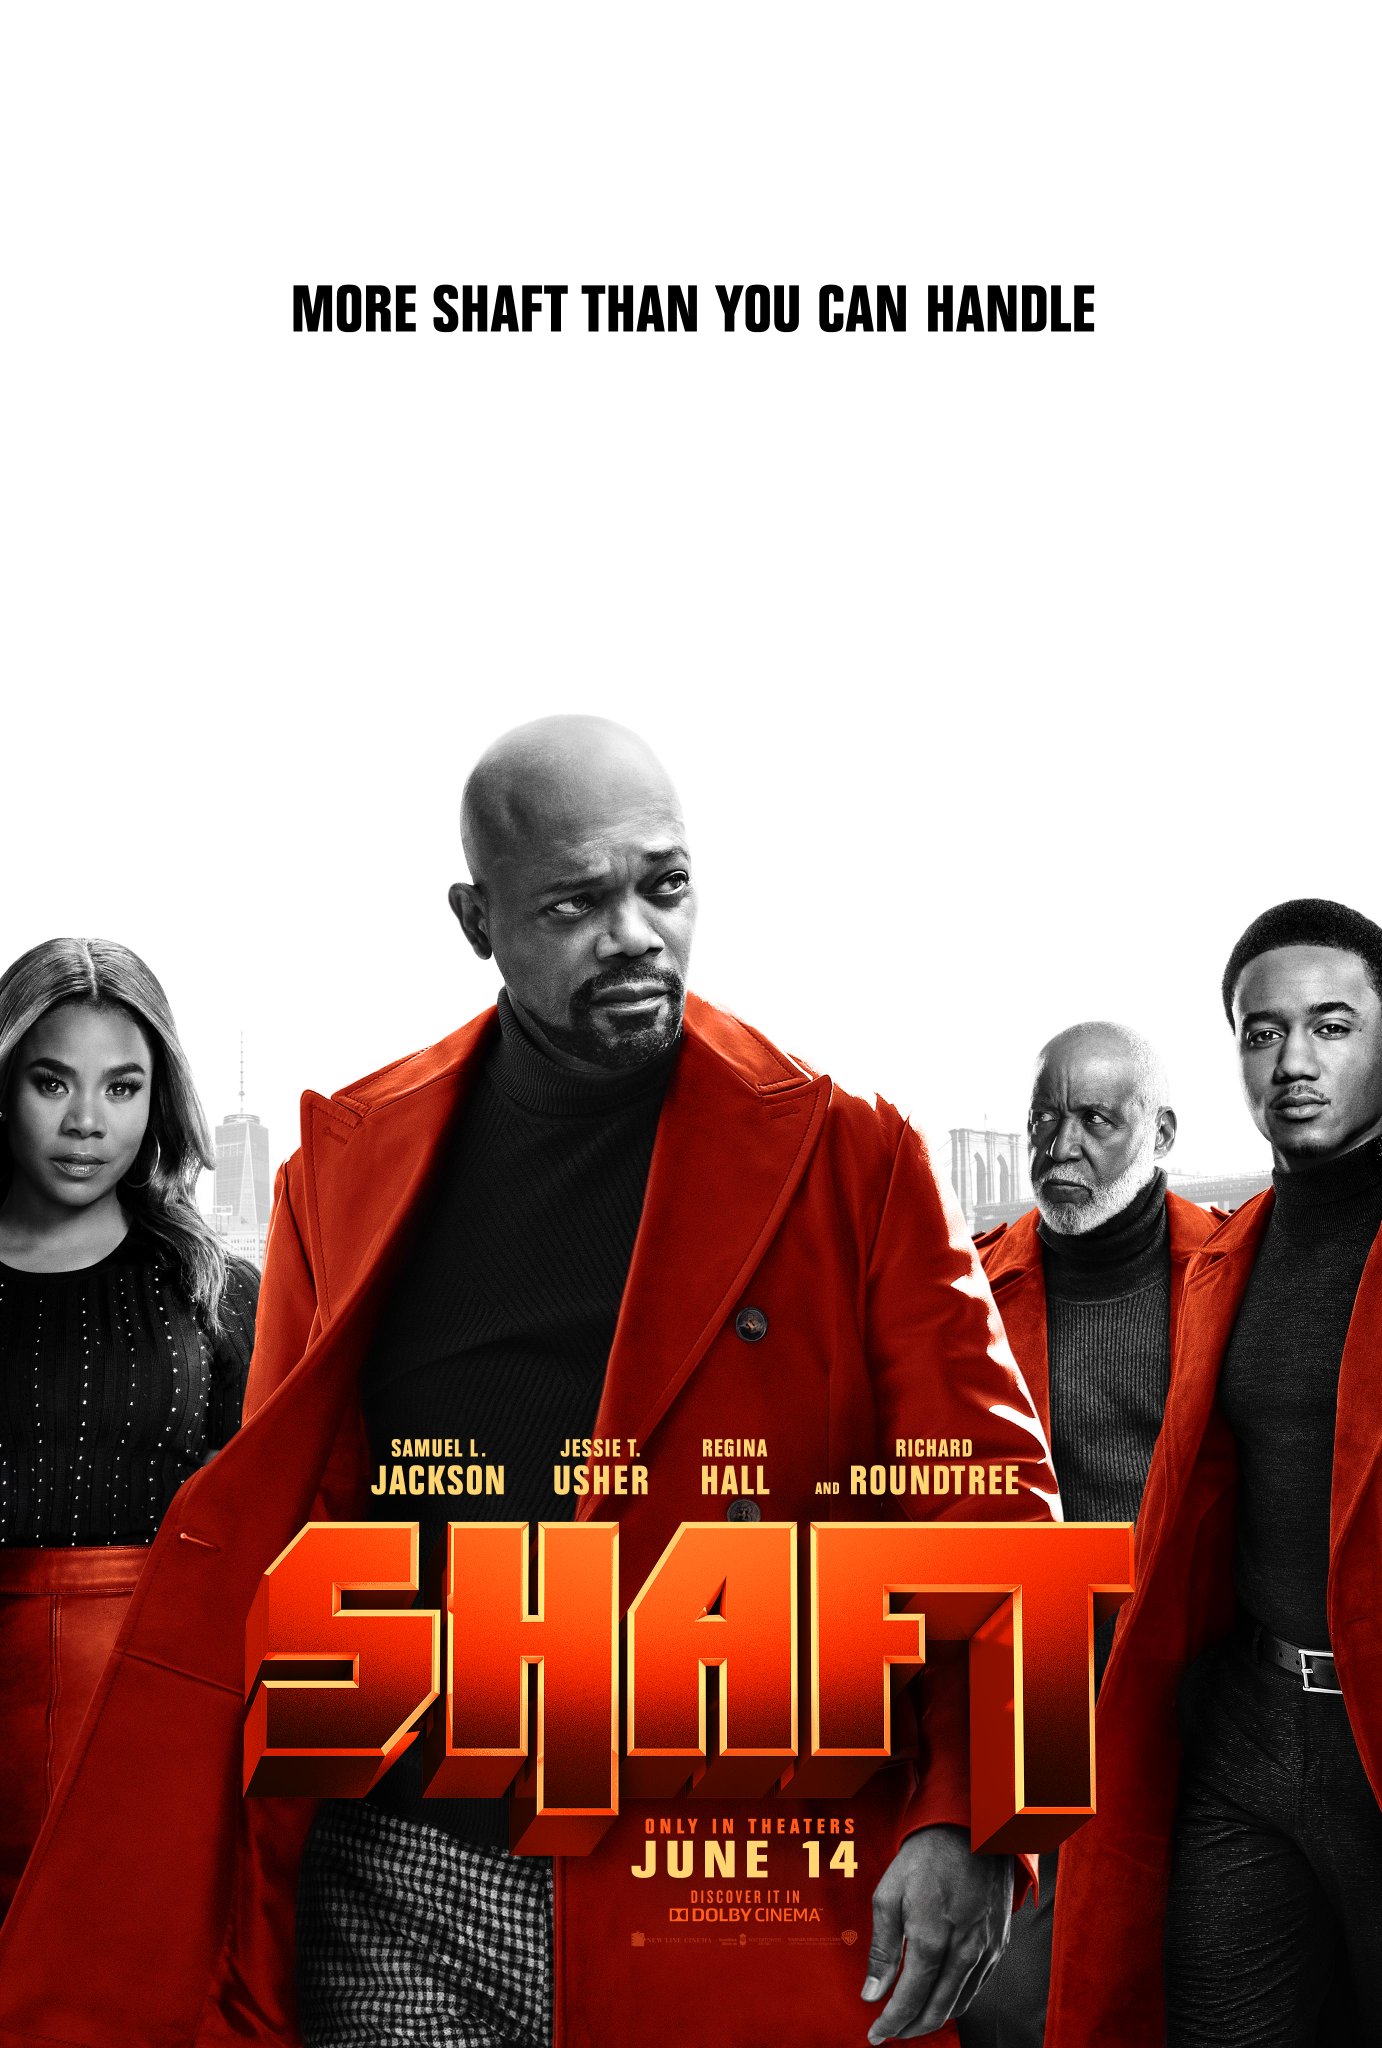 the-first-trailer-and-poster-for-shaft-is-more-shaft-than-you-can-handle2